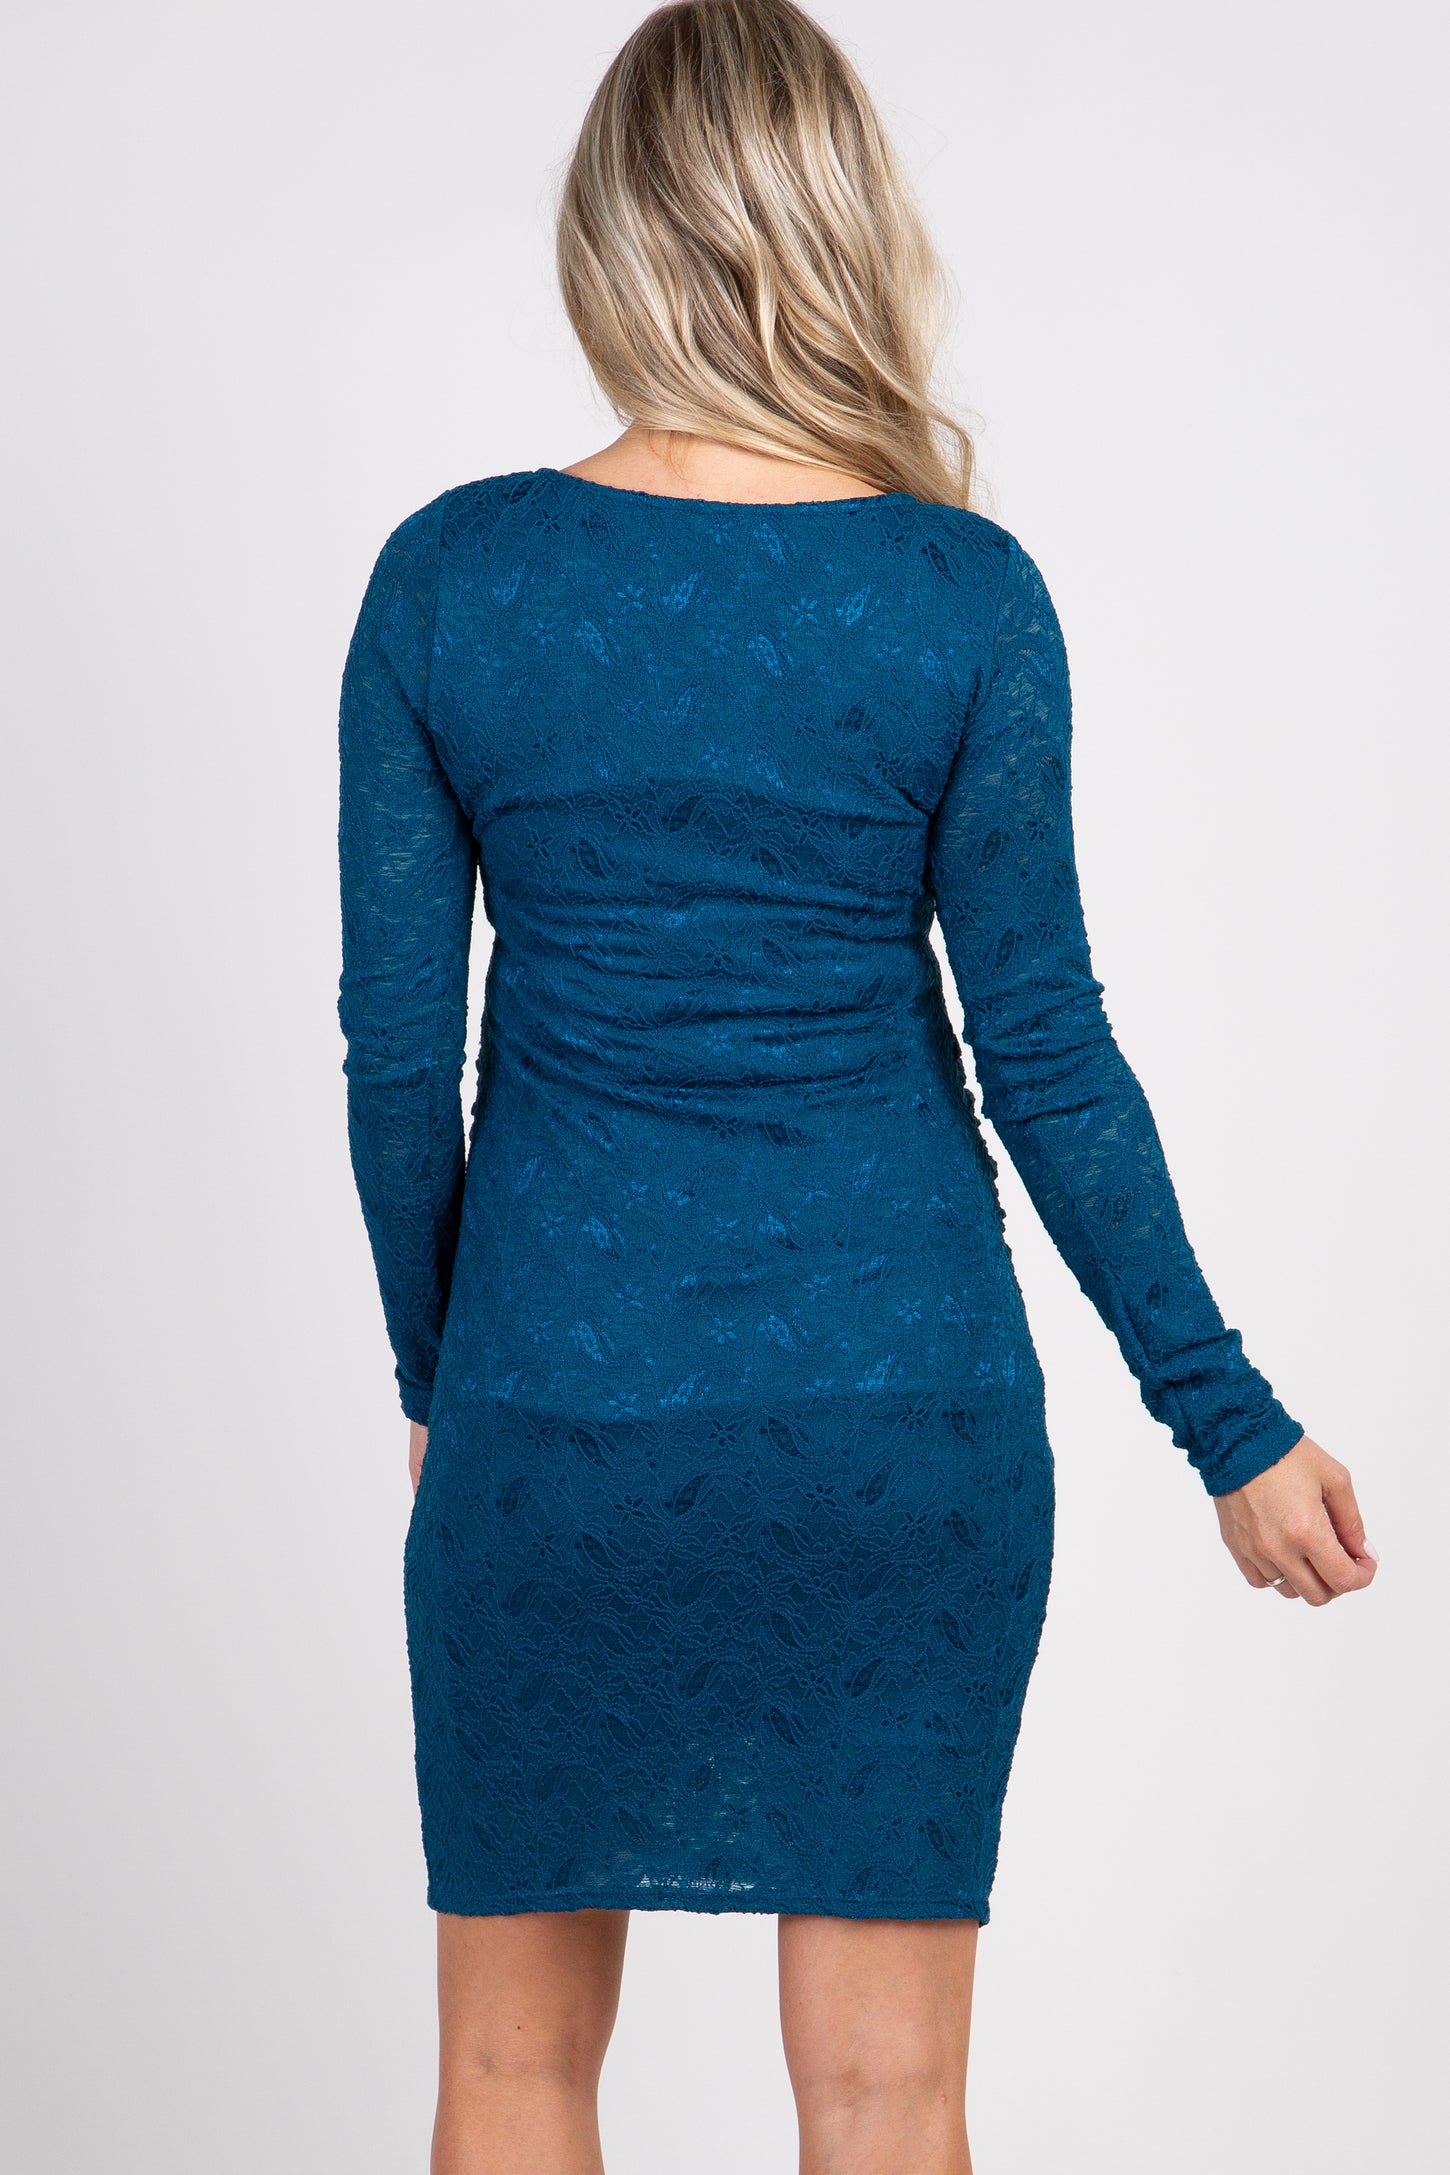 PinkBlush Teal Lace Fitted Long Sleeve Maternity Dress